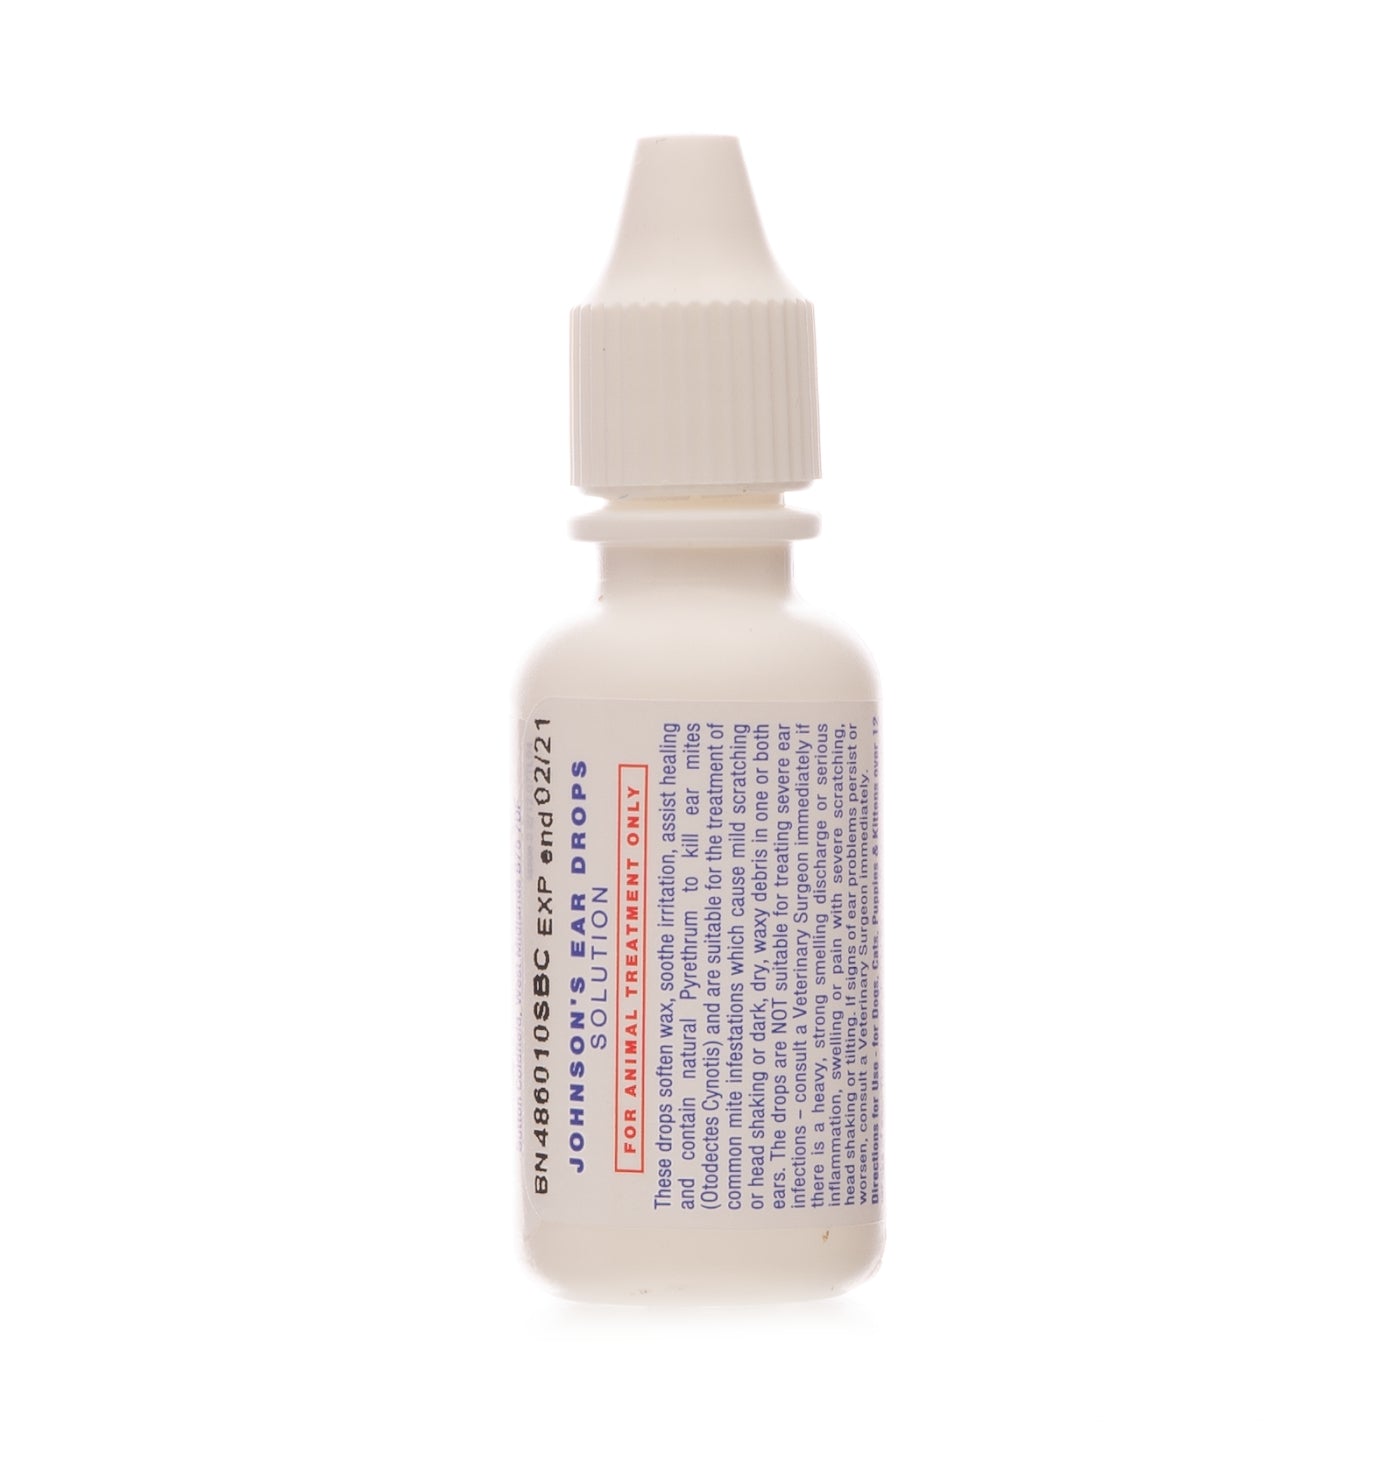 Johnson's - Ear Drops for Dogs and Cats - 15ml